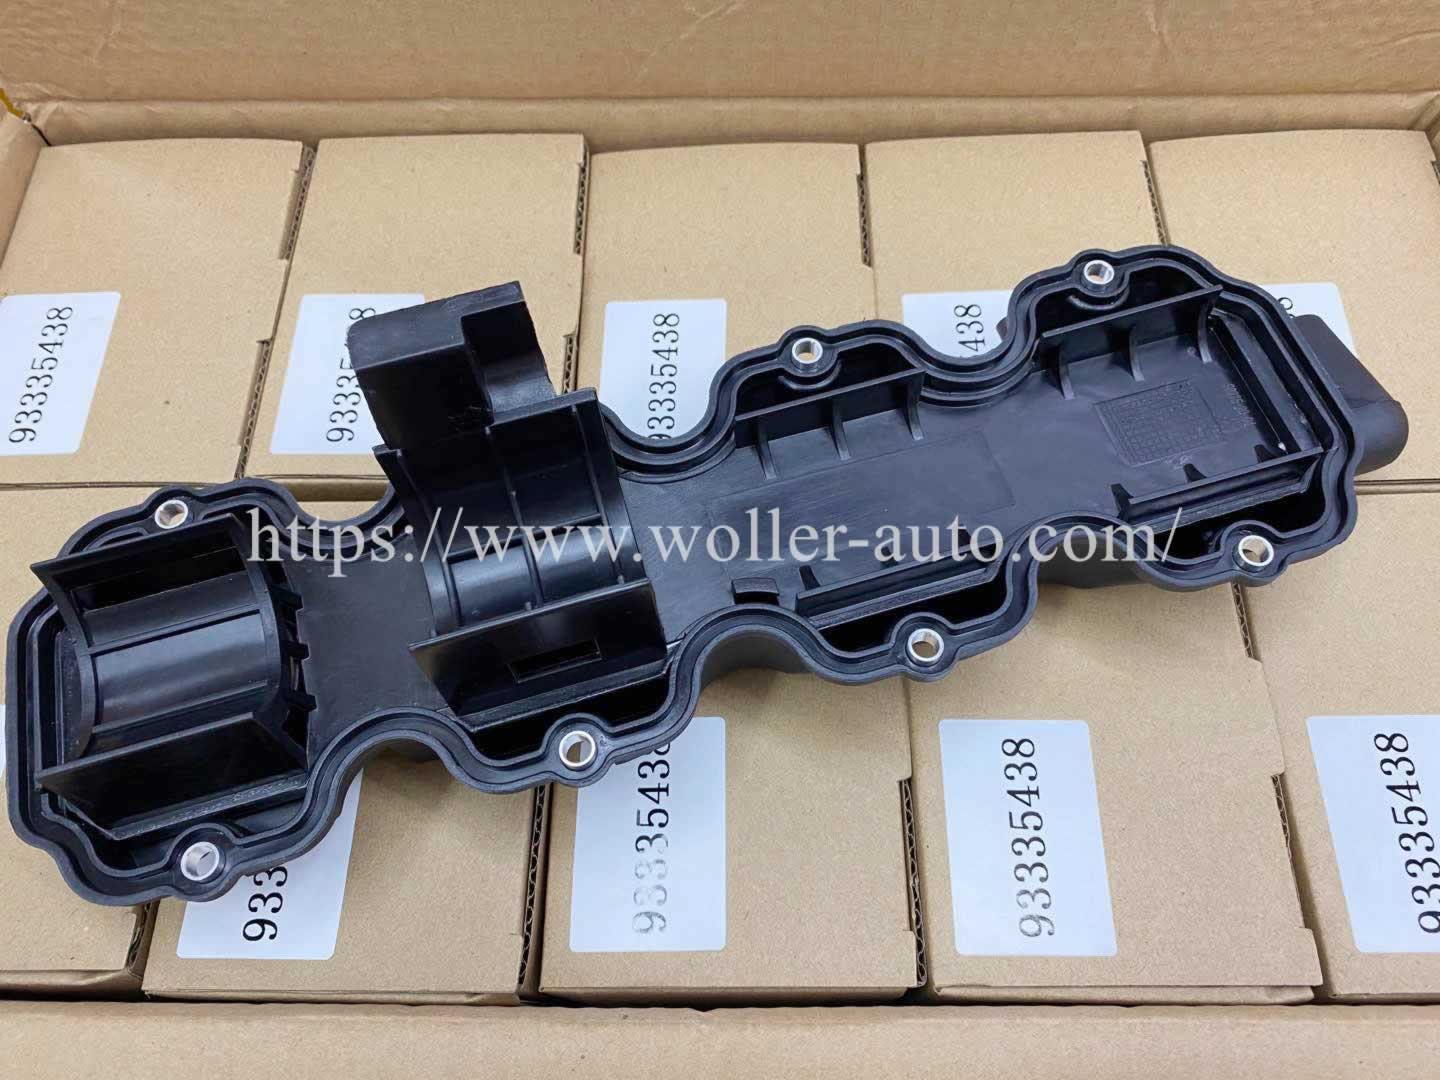 Engine Valve Cylinder Head Cover OE 93335438 For GM 1.6L Buick Opel Corsa Chevrolet Old Sail